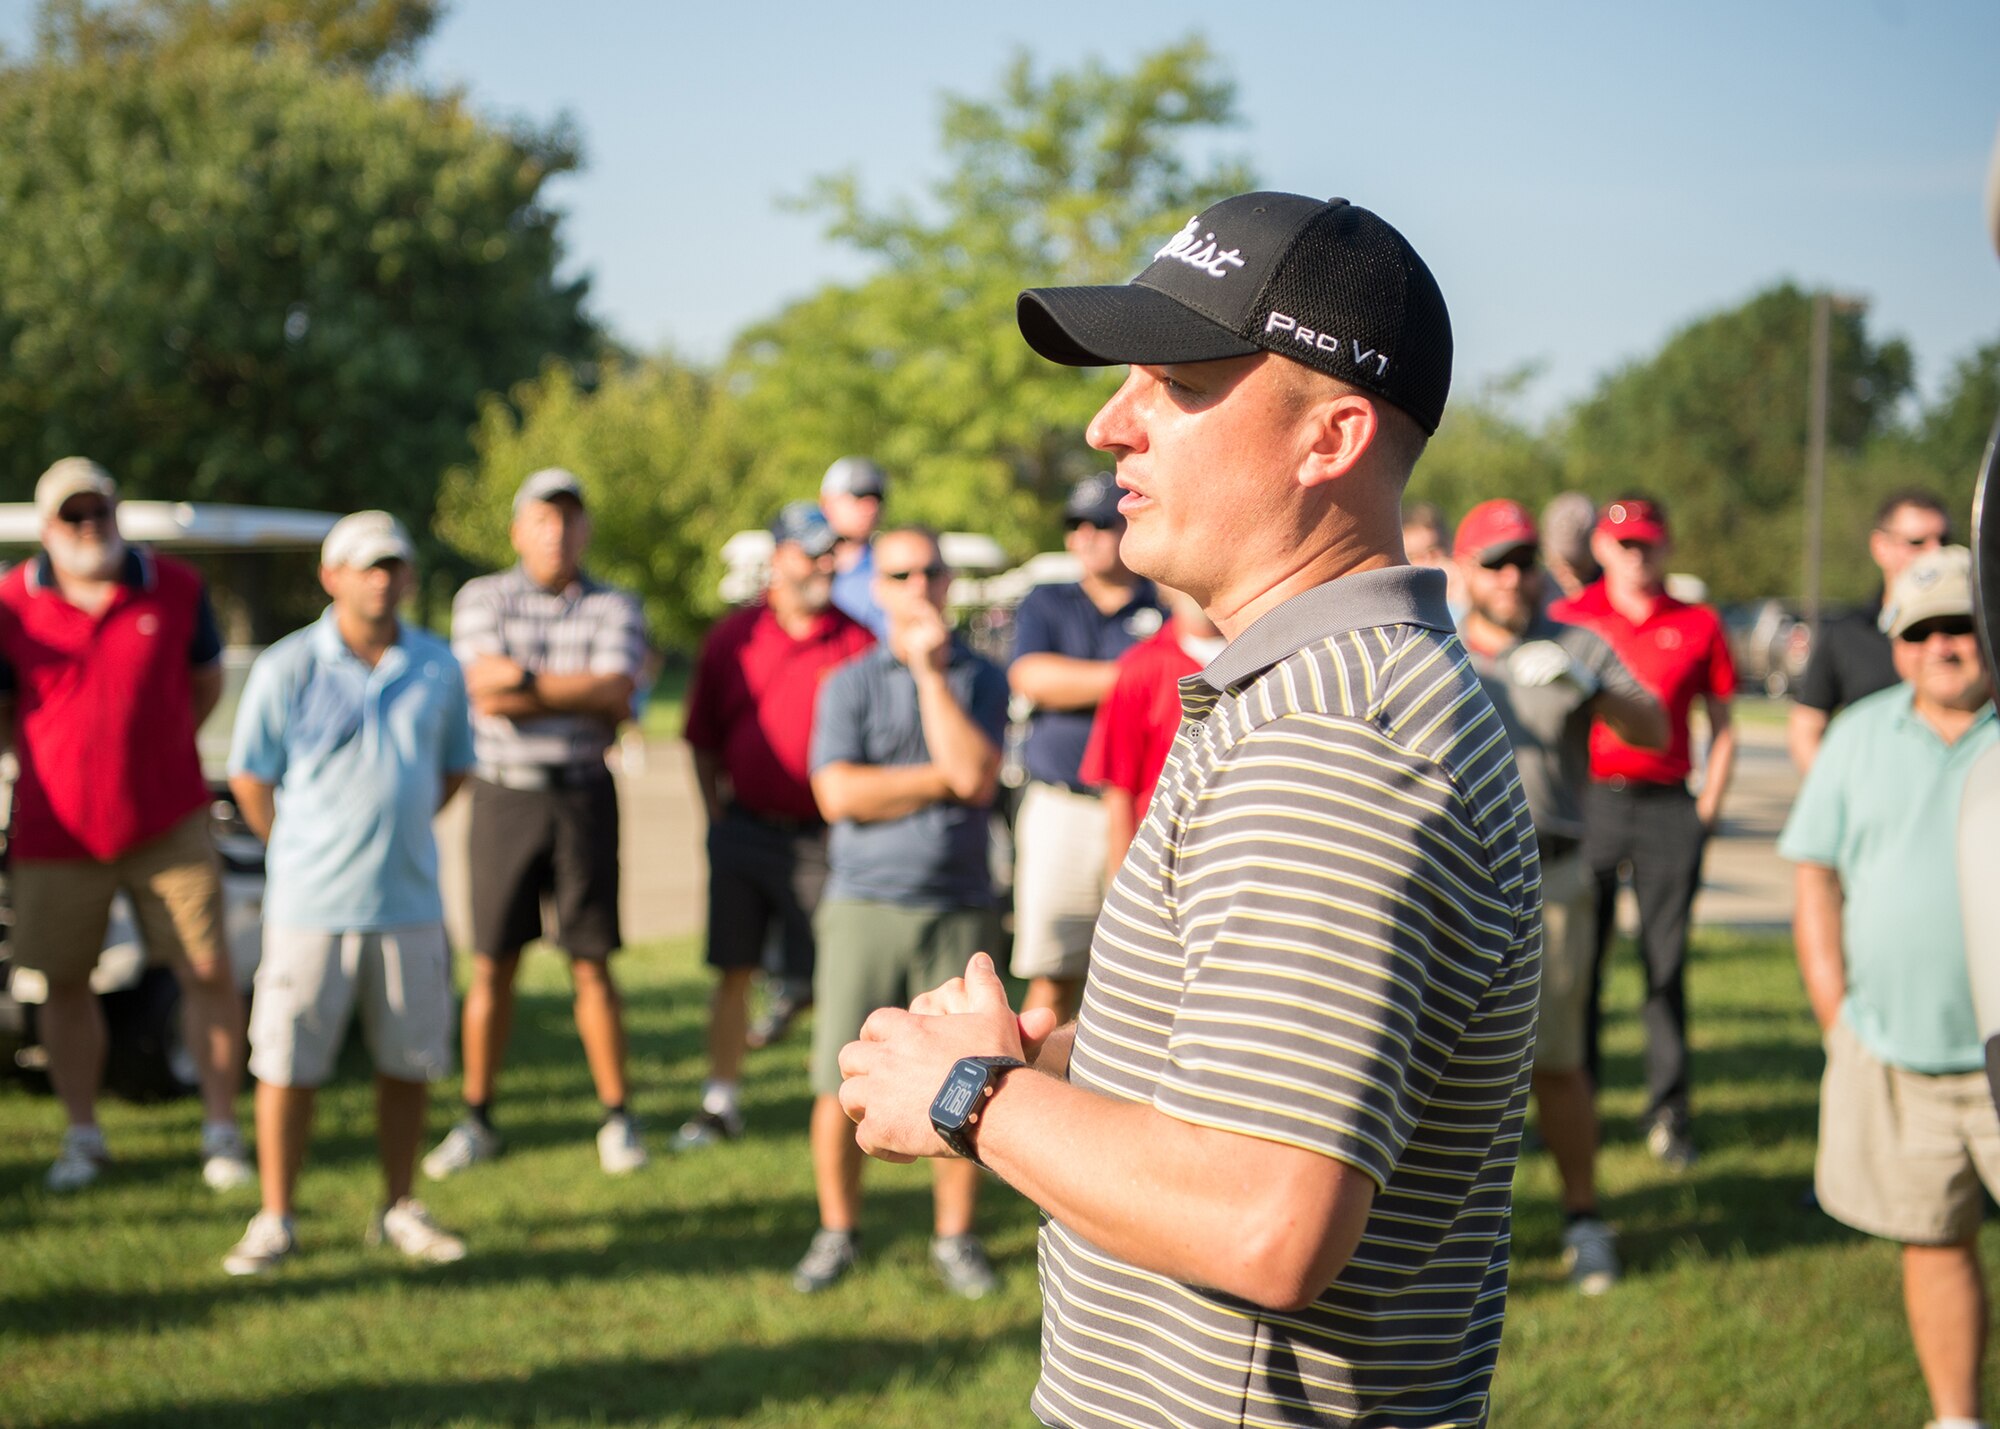 Col. Matthew Jones, 436th Airlift Wing vice commander, gives opening remarks during the Bluesuiters Golf Tournament Sept. 19, 2018, at the Eagle Creek Golf Course on Dover Air Force Base, Del. This was Jones’ first tournament since becoming wing vice commander in the summer of 2018.